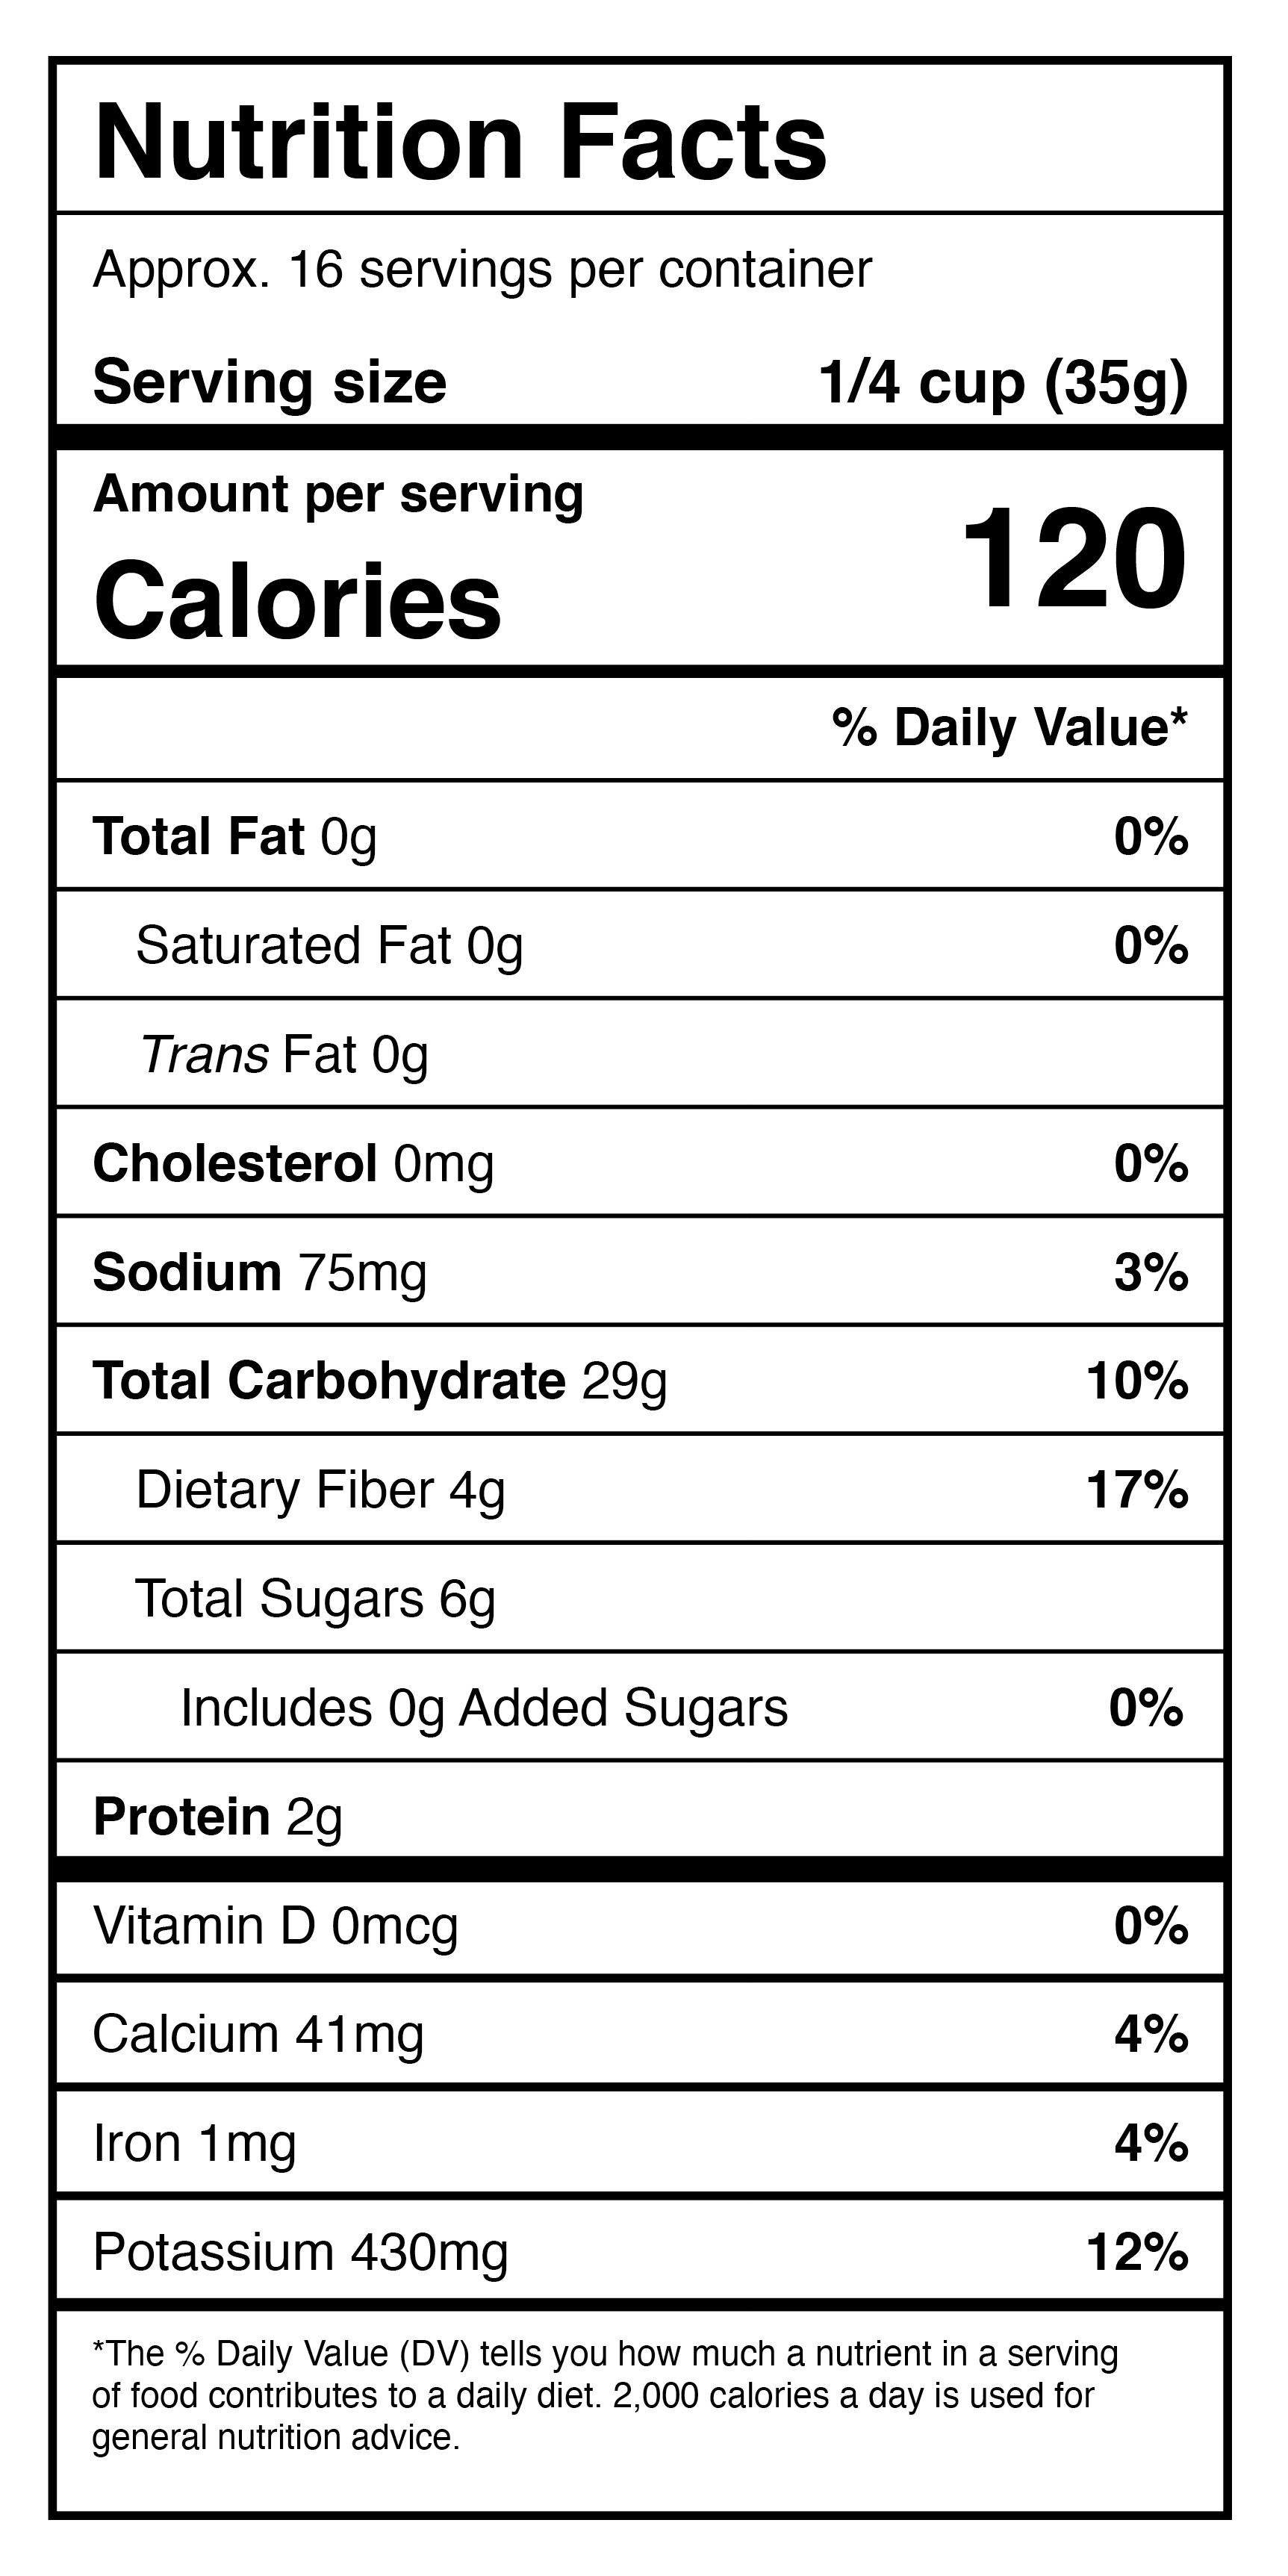 A nutrition label showing the nutrition facts of a Jar (19.5 oz) of Harmony House Dried Sweet Potatoes.